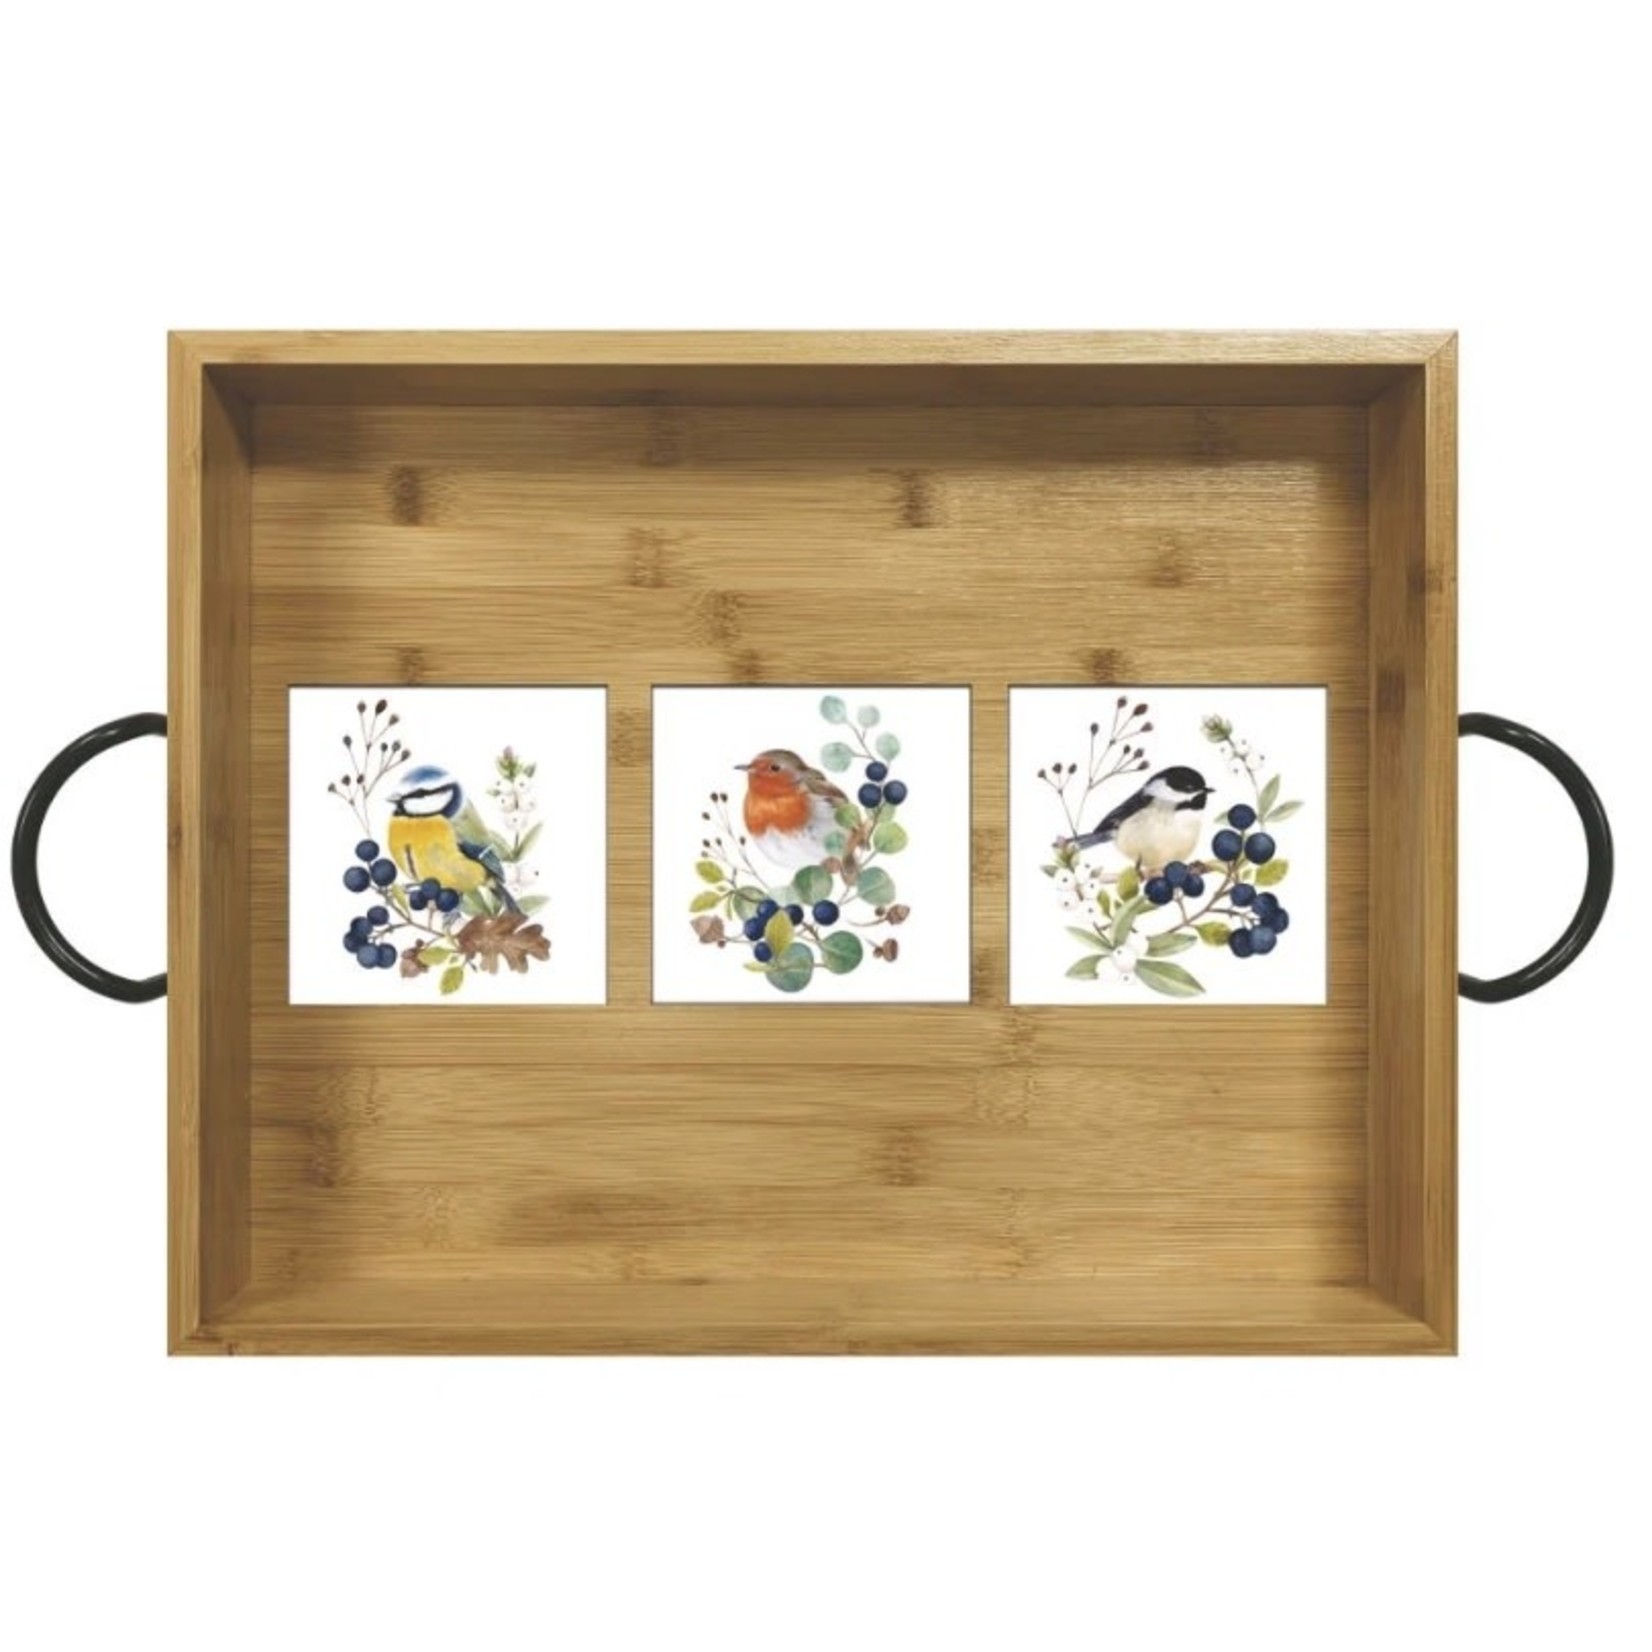 PAPER PRODUCTS DESIGN PPD Bamboo Serving Tray - Les Oiseaux